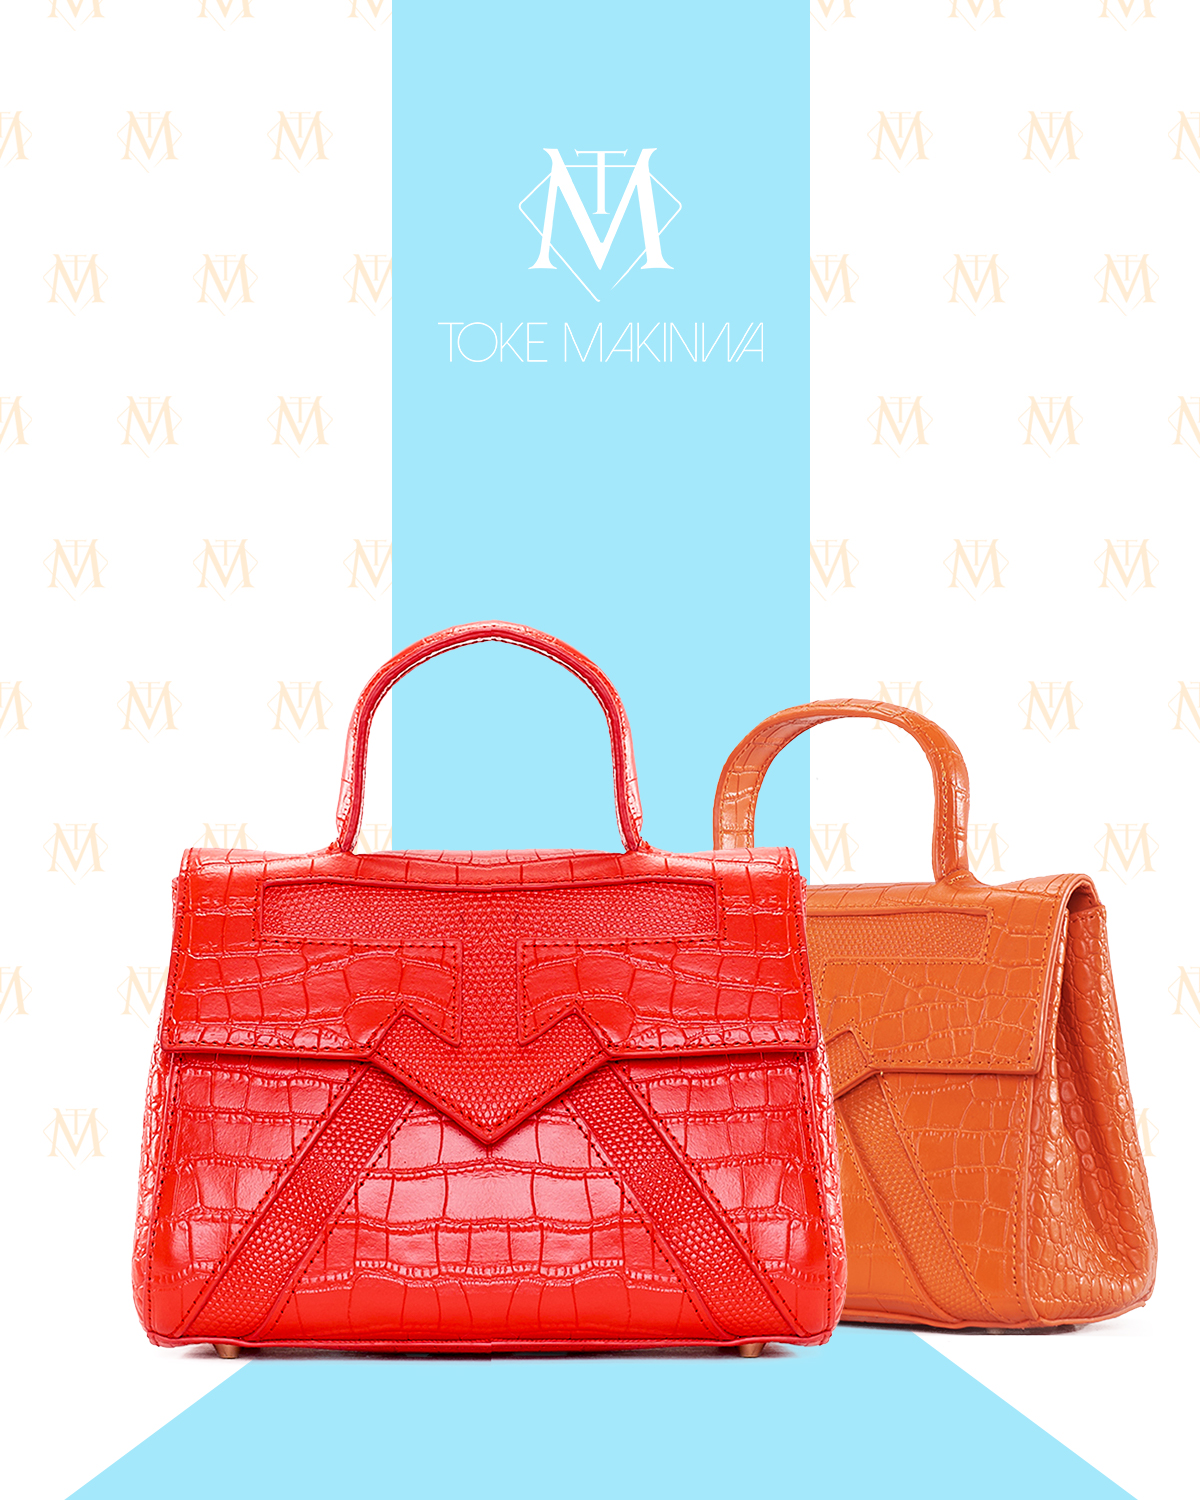 The TM Mini Handbag May Be The New Hero Piece For All Outfits!